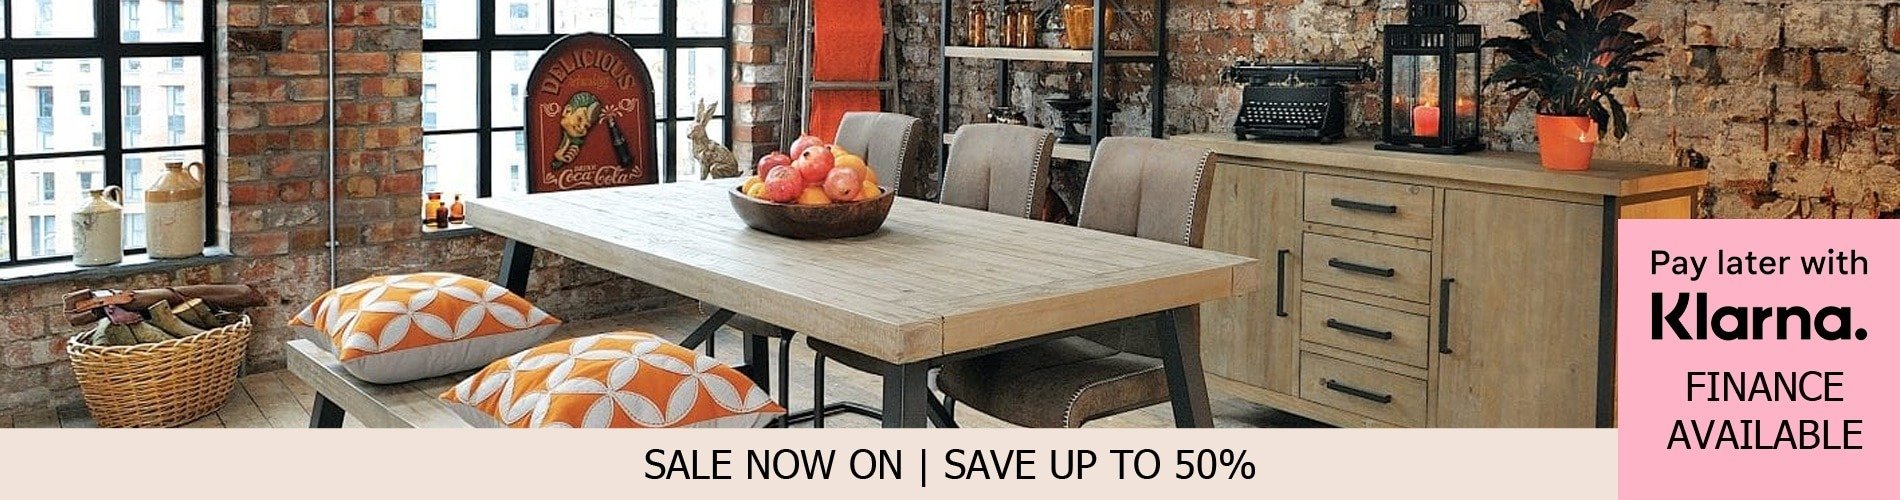 Oak Furniture Uk Store Free Delivery Up To 50 Off